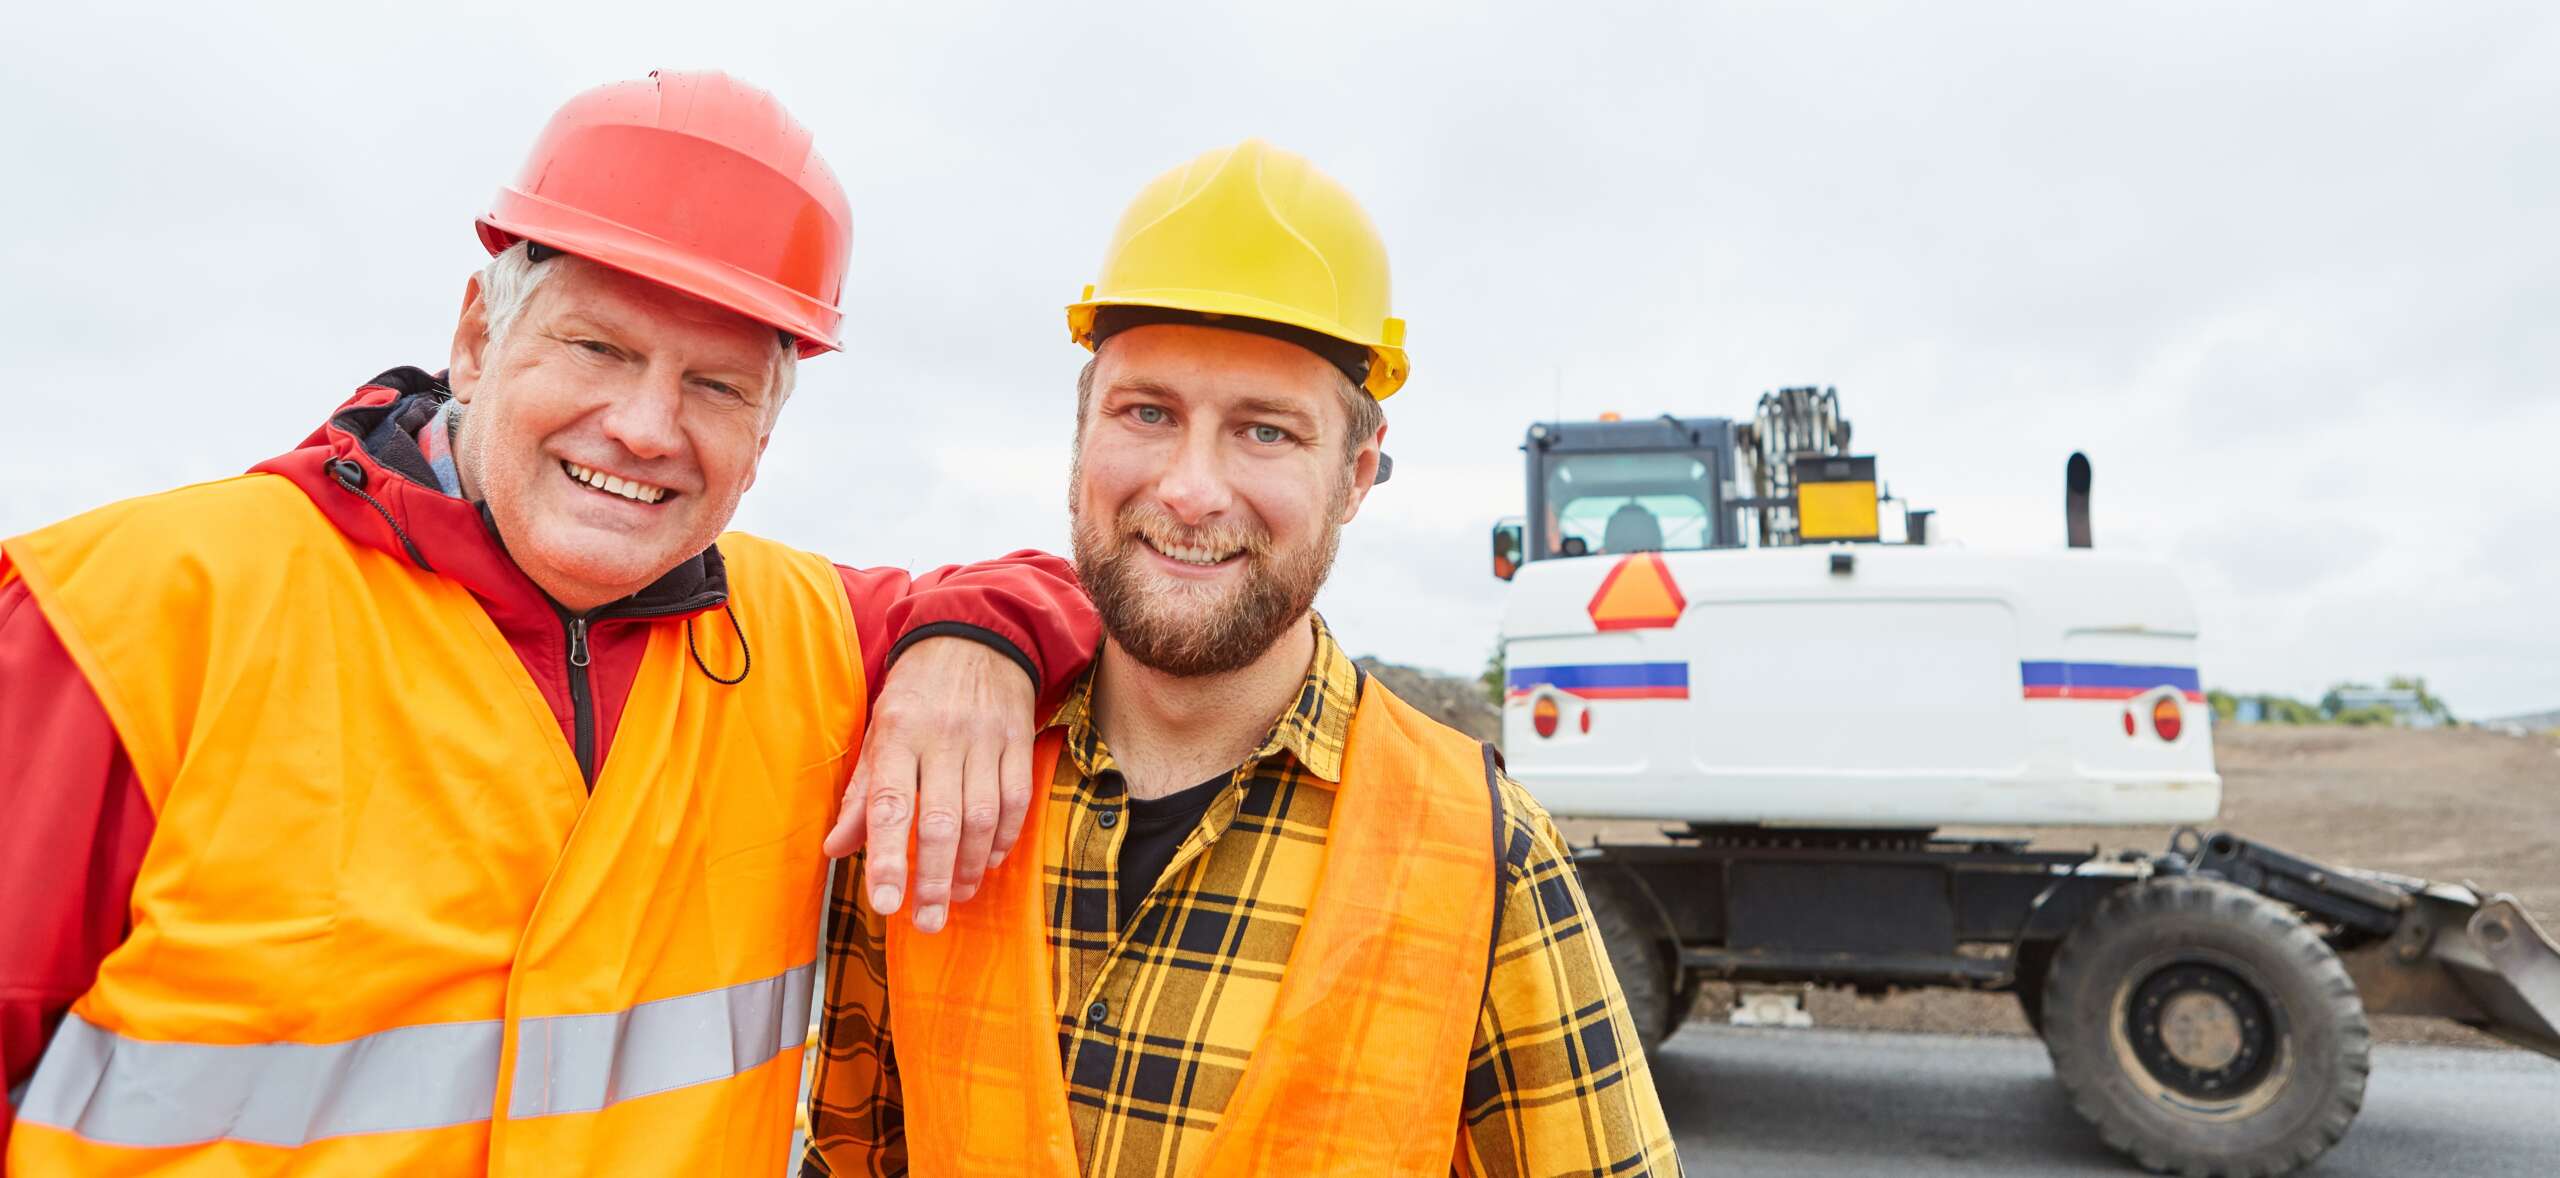 Older man resting his arm on the shoulder of a younger man, both in high visibility clothing with hard hats on. Construction machinery in the baackground